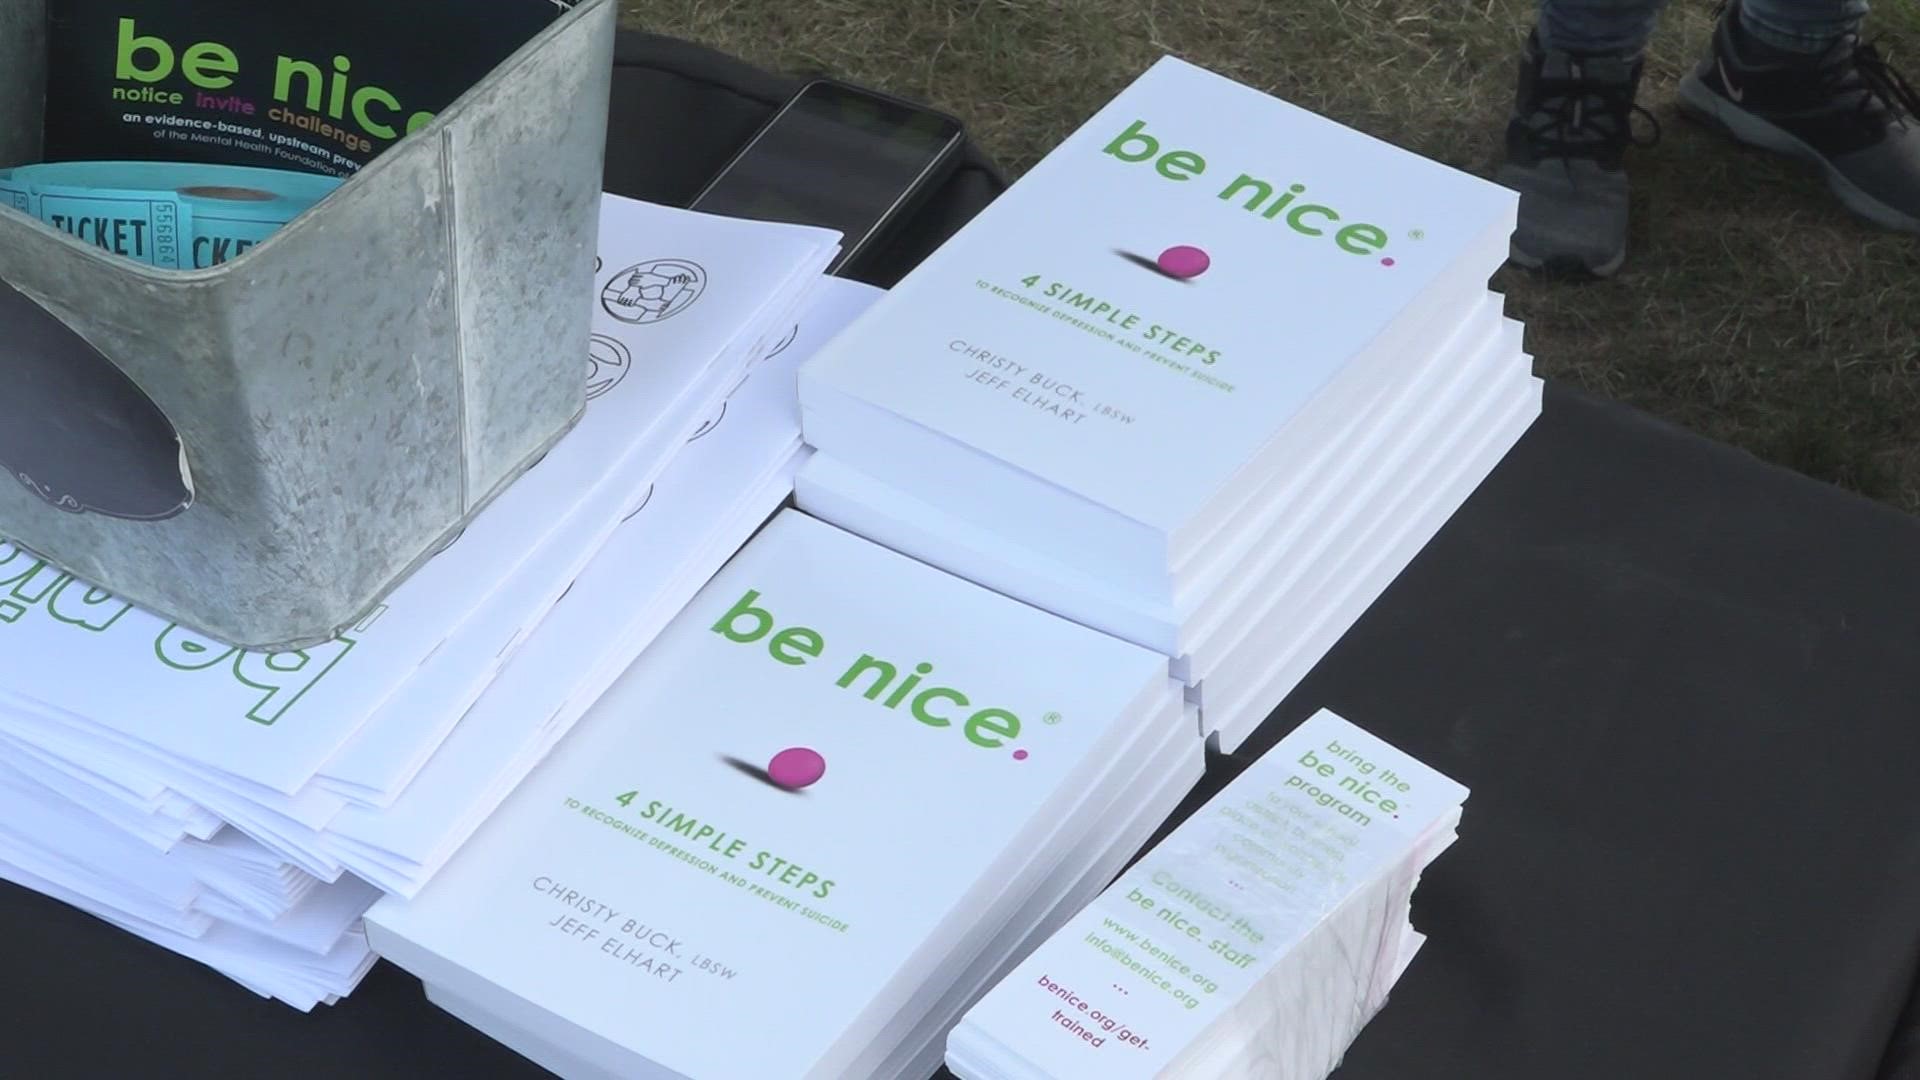 Thursday the Mental Health Foundation of West Michigan hosted an event to raise awareness and share resources.